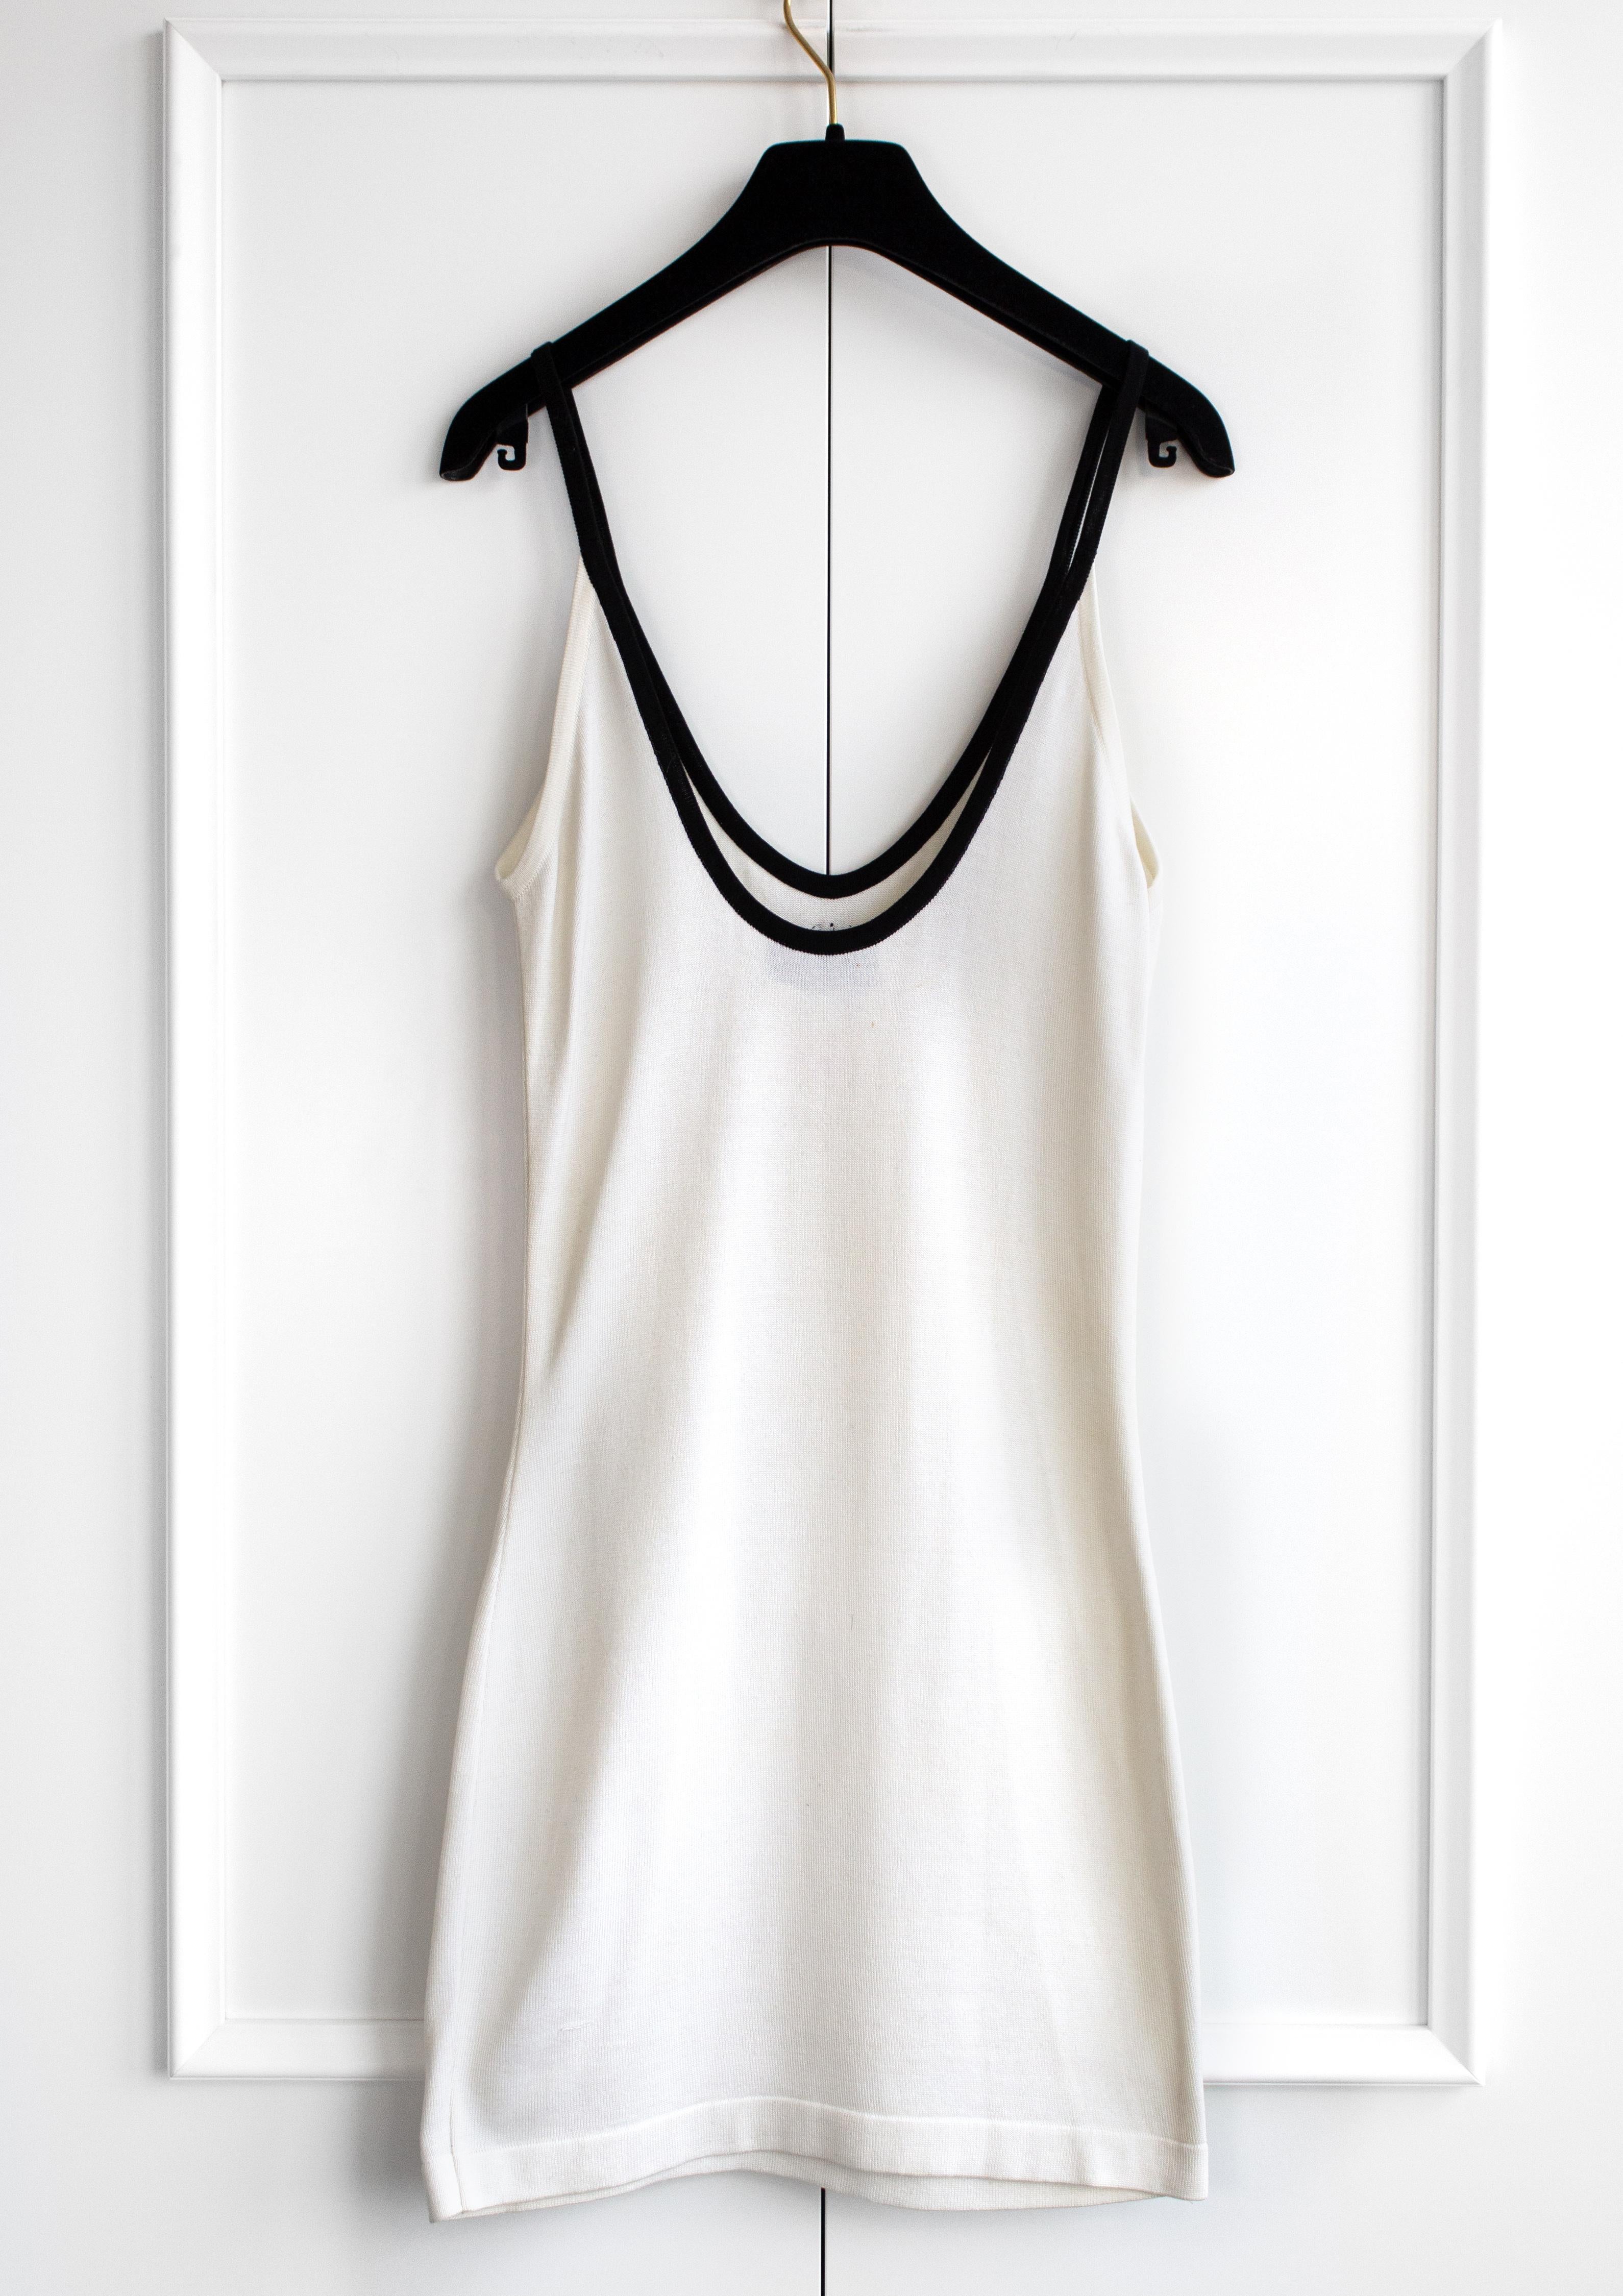 A classic scoop-neck white cotton mini dress with a contrasting black trim and CC logo from Chanel Spring/Summer 1994 collection. Very good condition, no major flaws except a couple tiny spots on the back. Size not listed, best fits FR34.